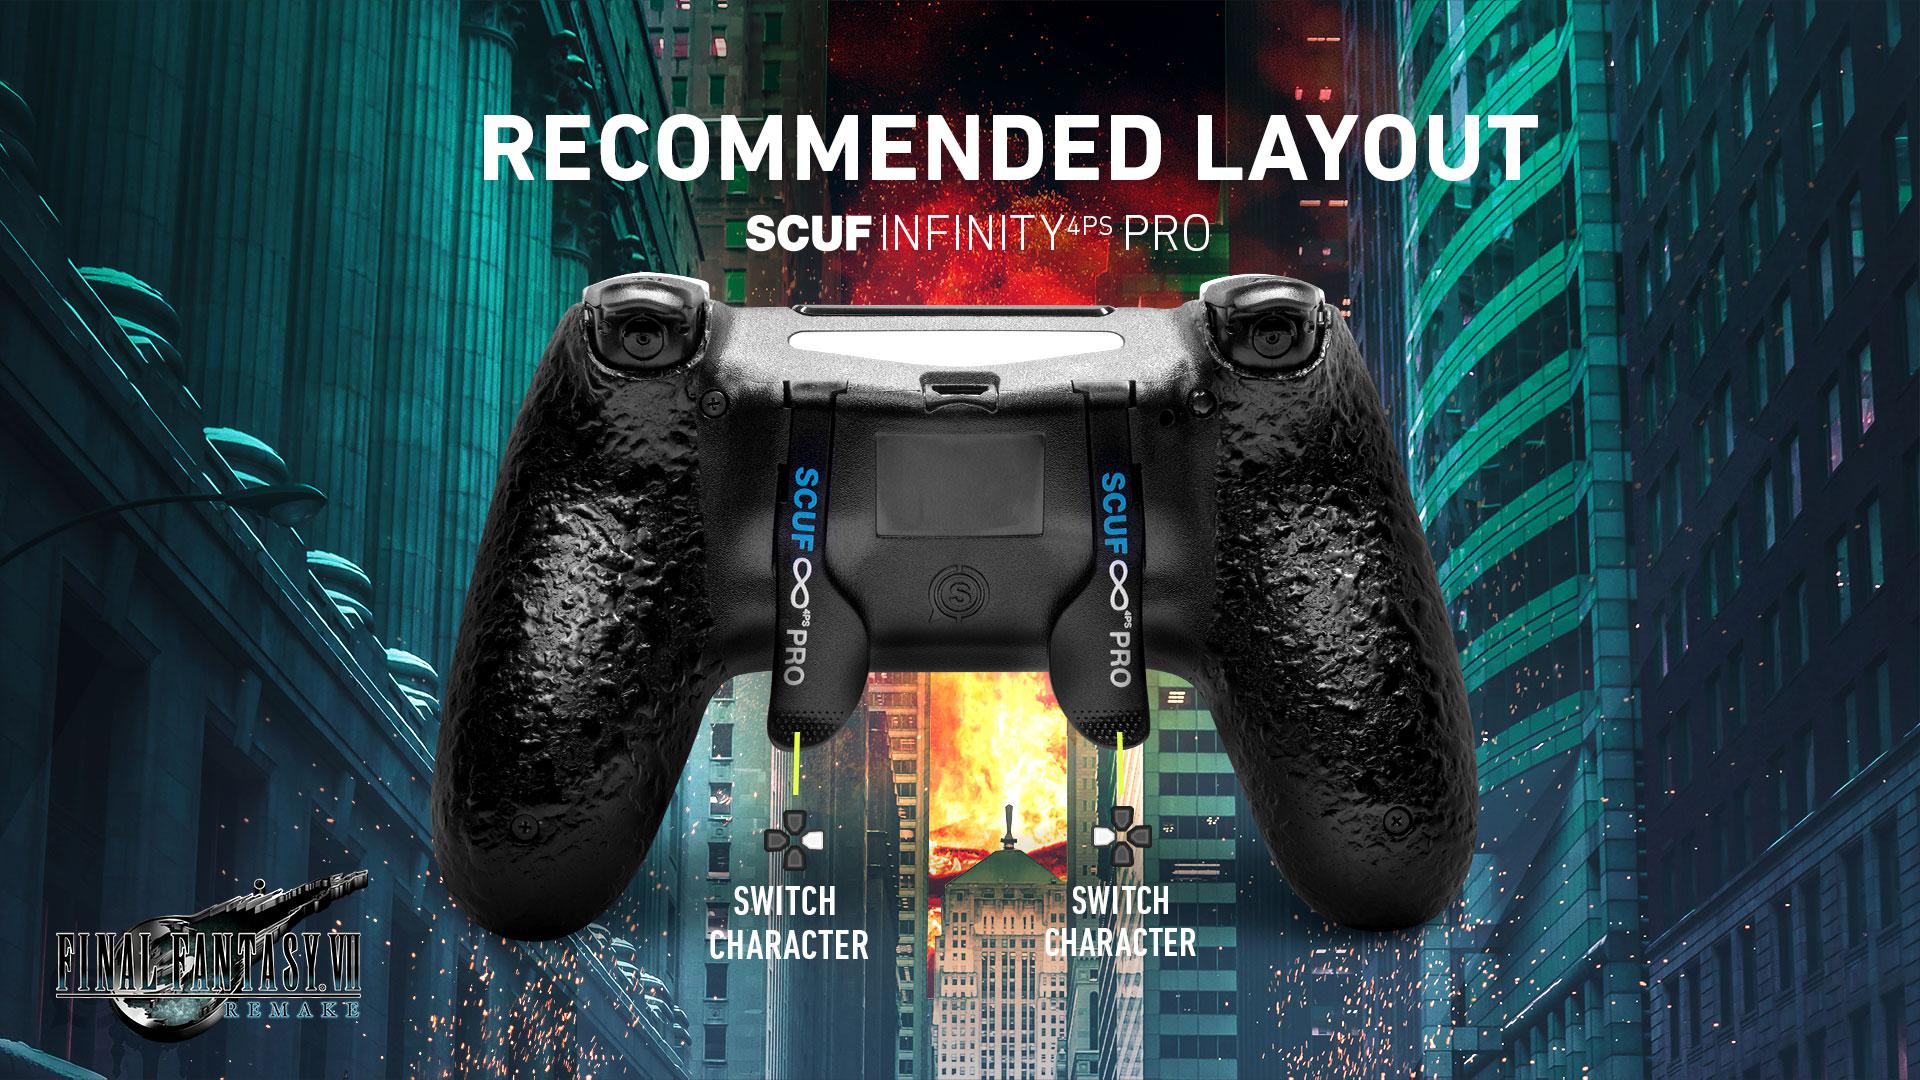 SCUF Infinity4PSPRO Final Fantasy VII Remake PS4 Controller Layout